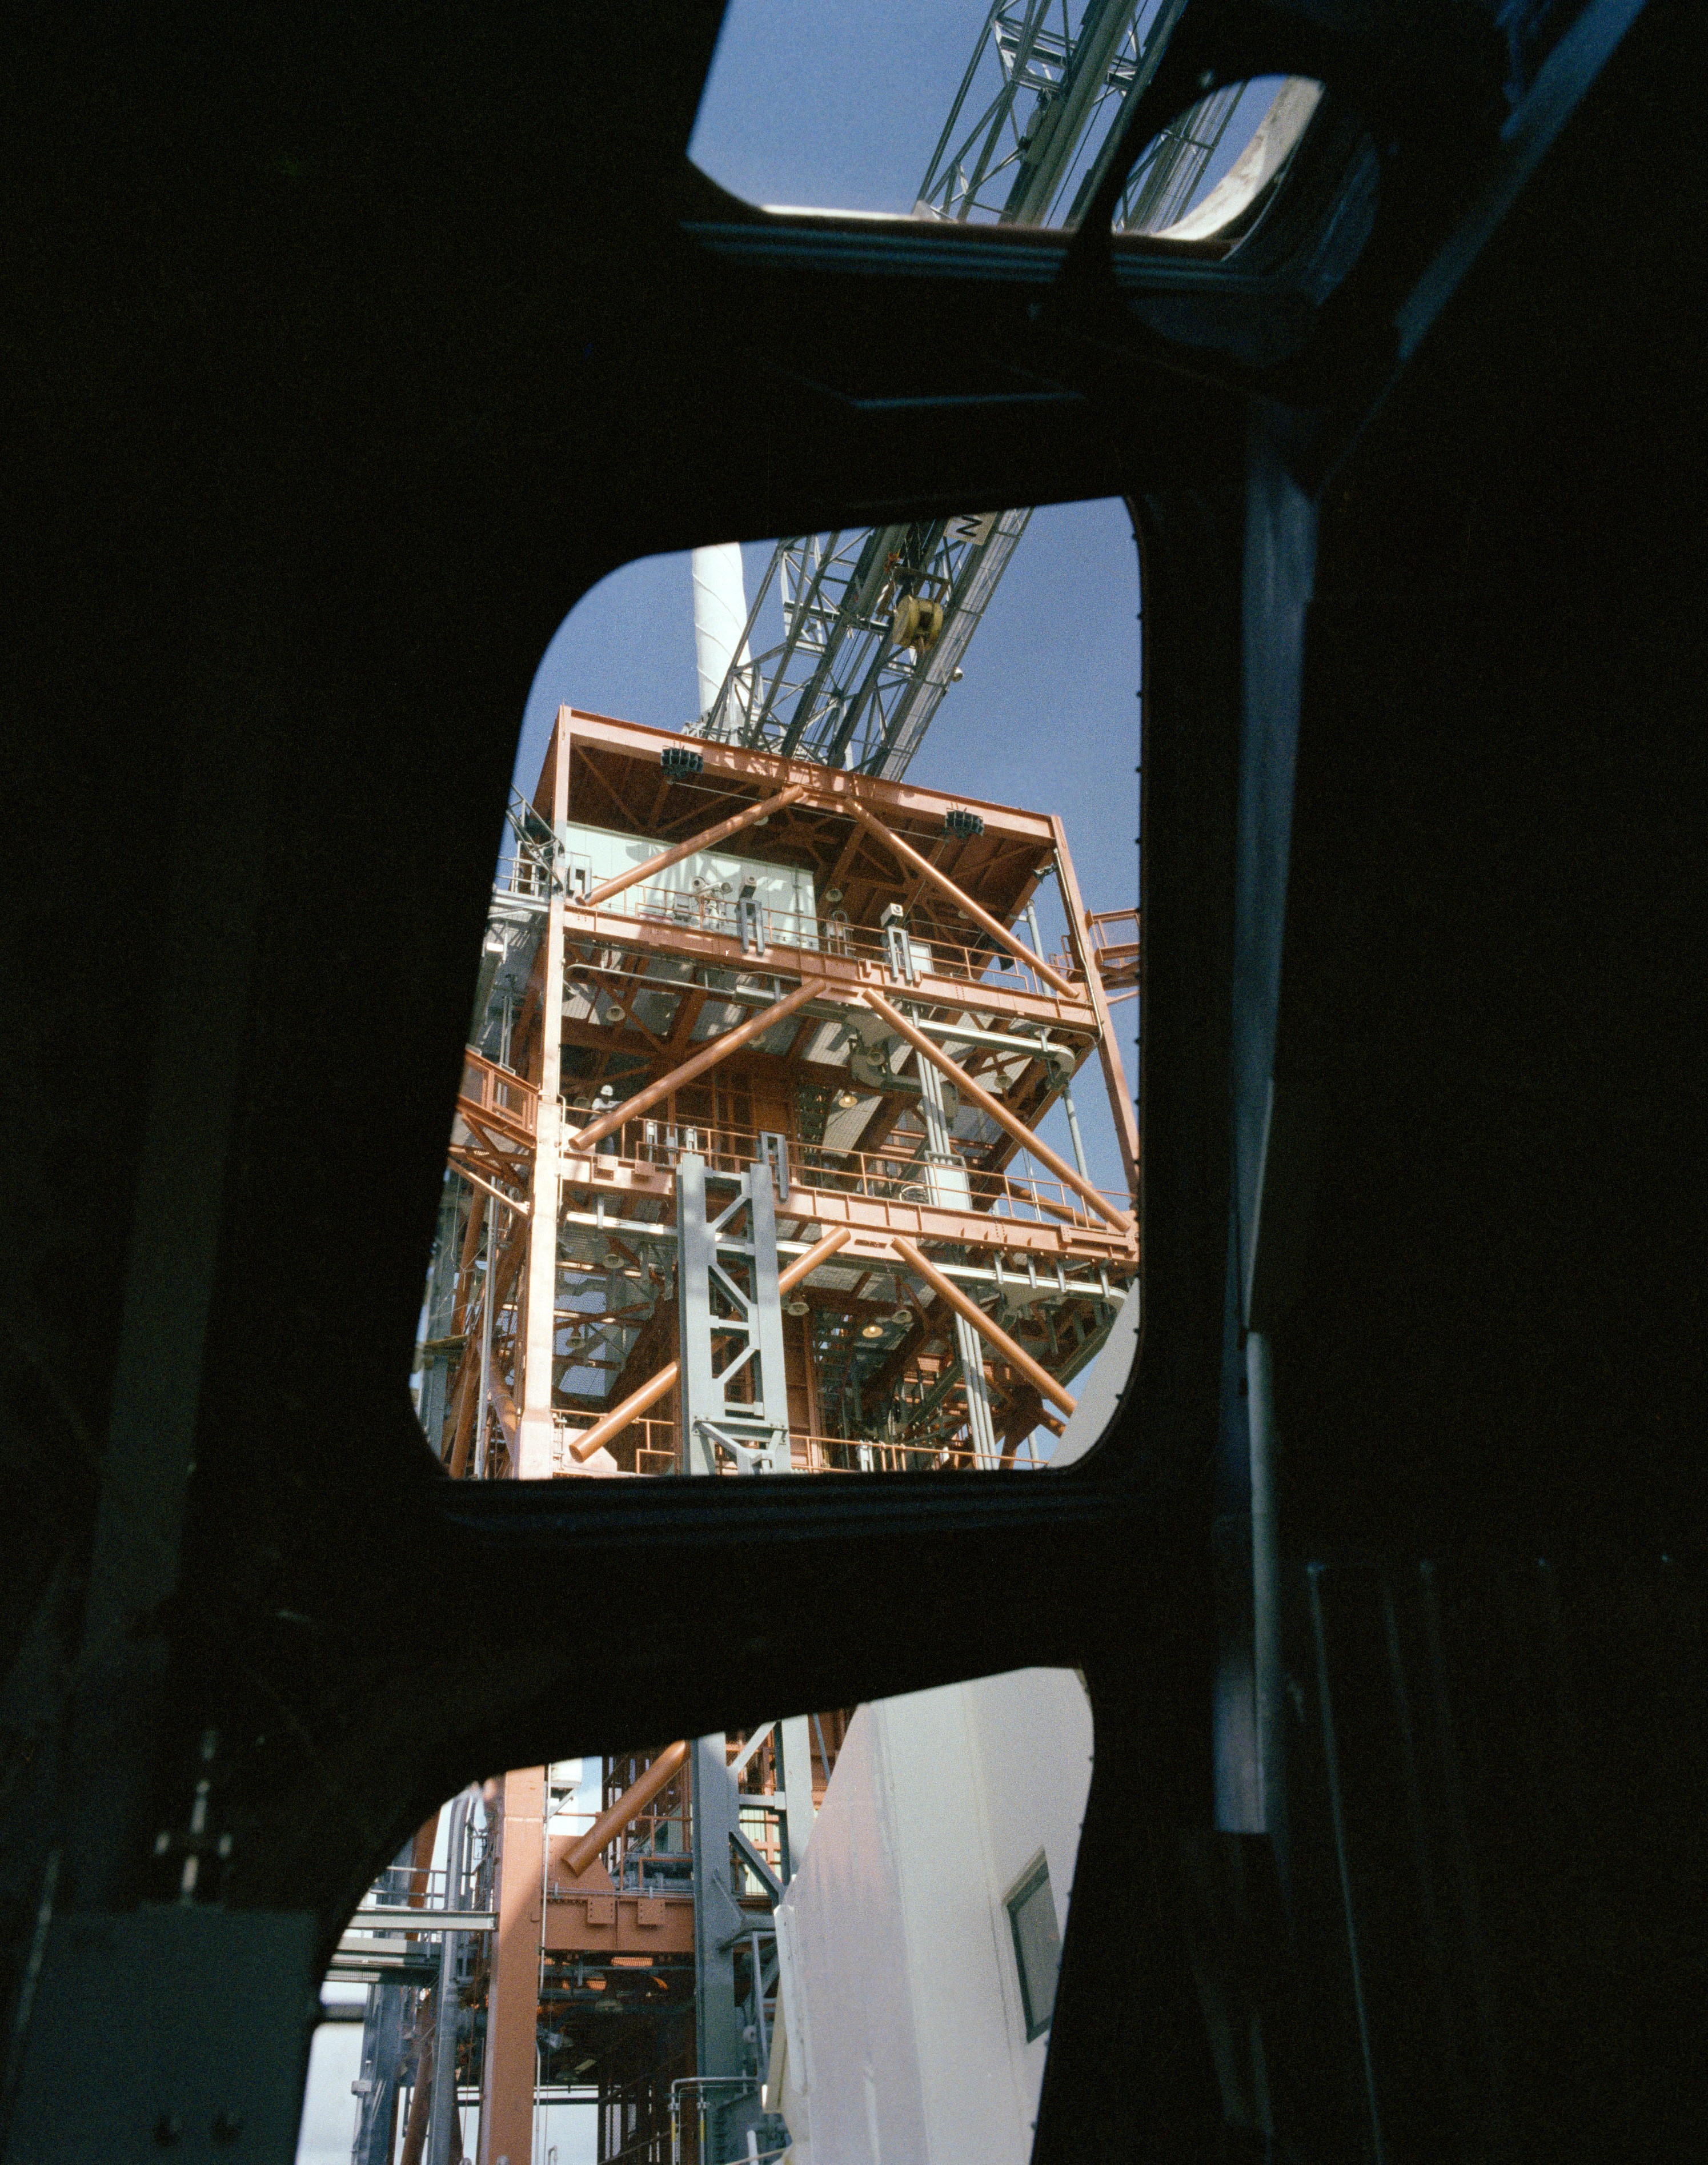 Pilot’s eye view of the launch tower looking up through Enterprise’s forward windows